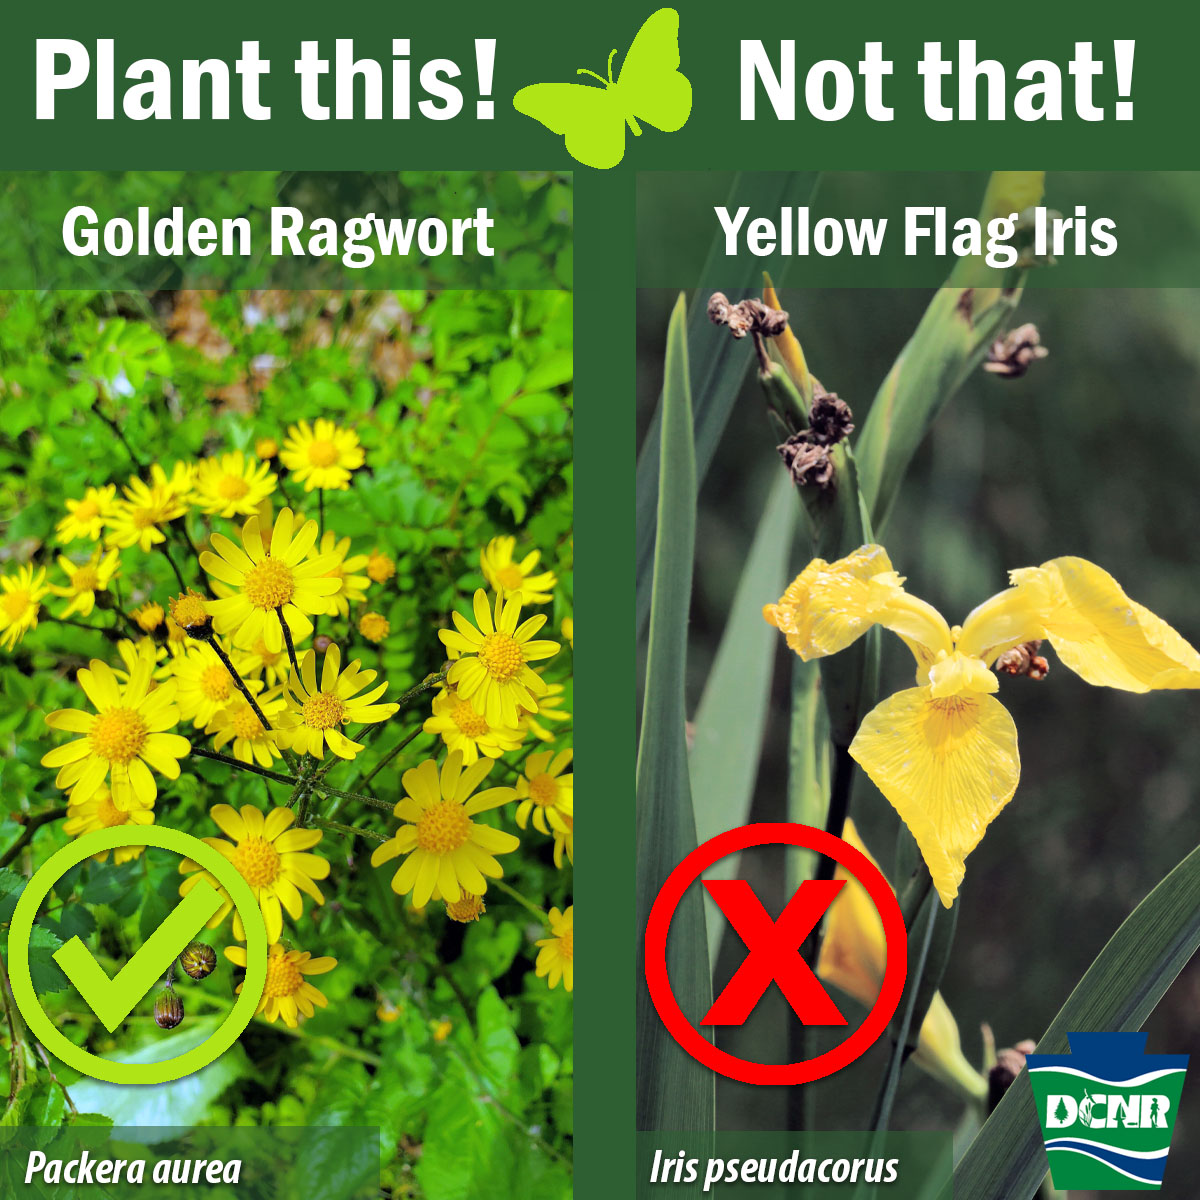 Invasive yellow flag iris displaces #PaNativeSpecies in marshy areas, disrupting aquatic food chains ➡️ bit.ly/2SjRoqa. A native choice is #GoldenRagwort, an adaptable plant with bright yellow blooms in spring that attract pollinators. Natives ➡️ bit.ly/2JZs99I.